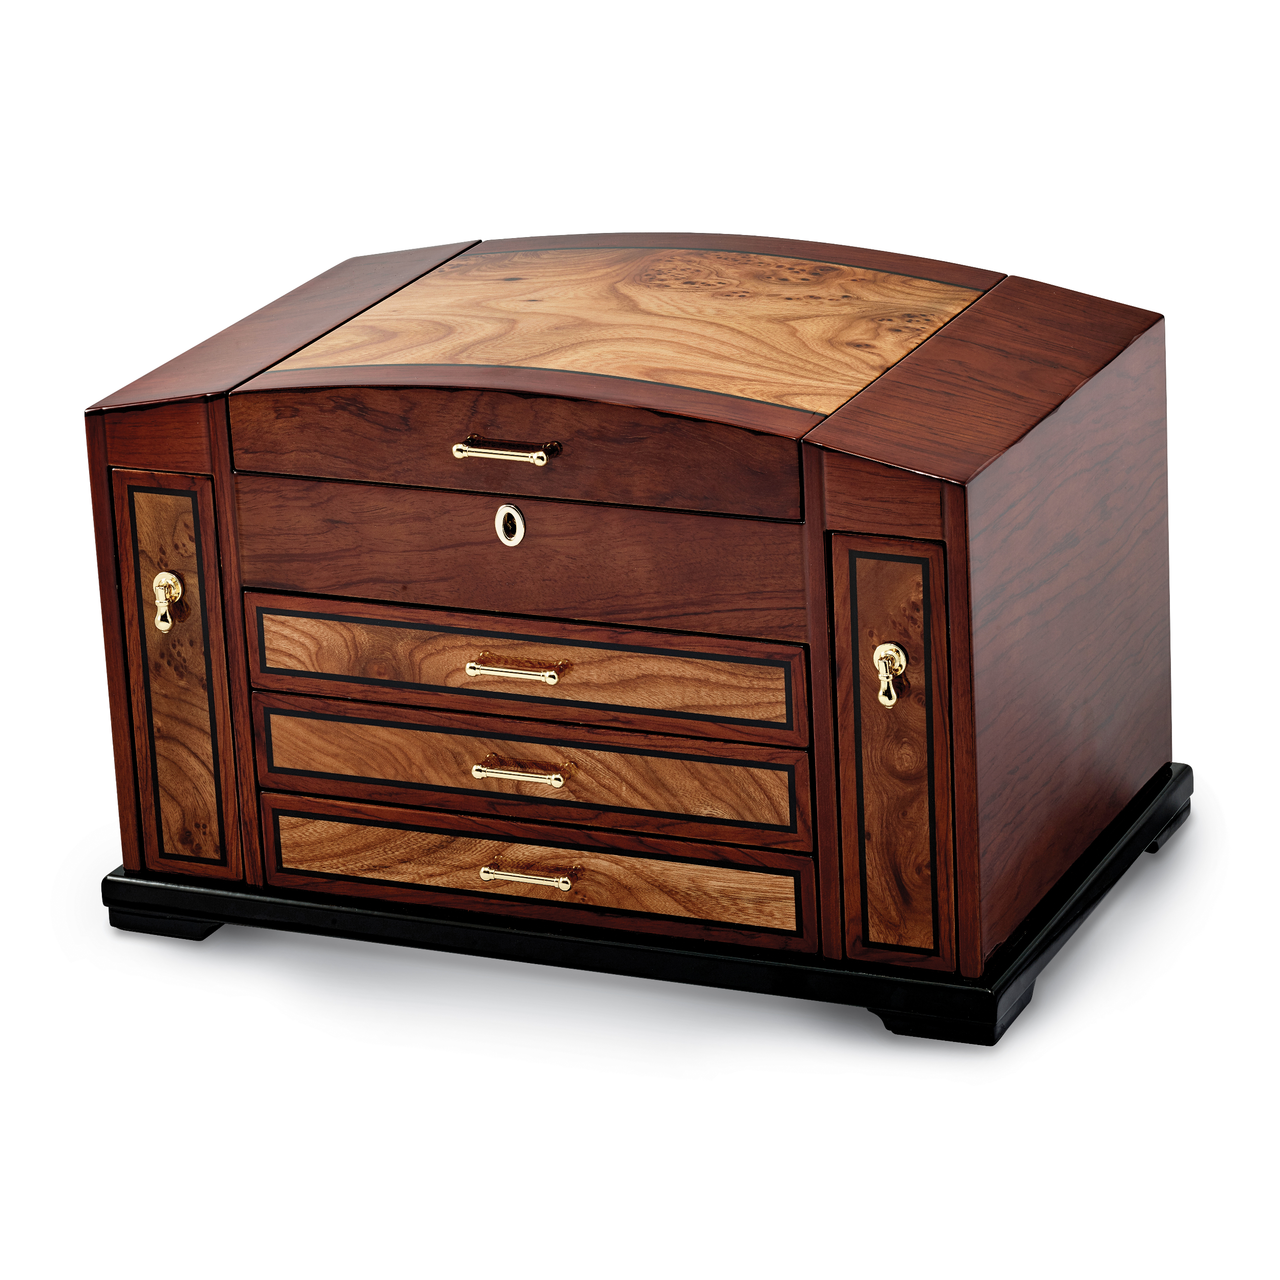 Bubinga Veneer with Elm Burl Inlay 3 Drawer with Slide-out Sides Jewelry Box by Jere